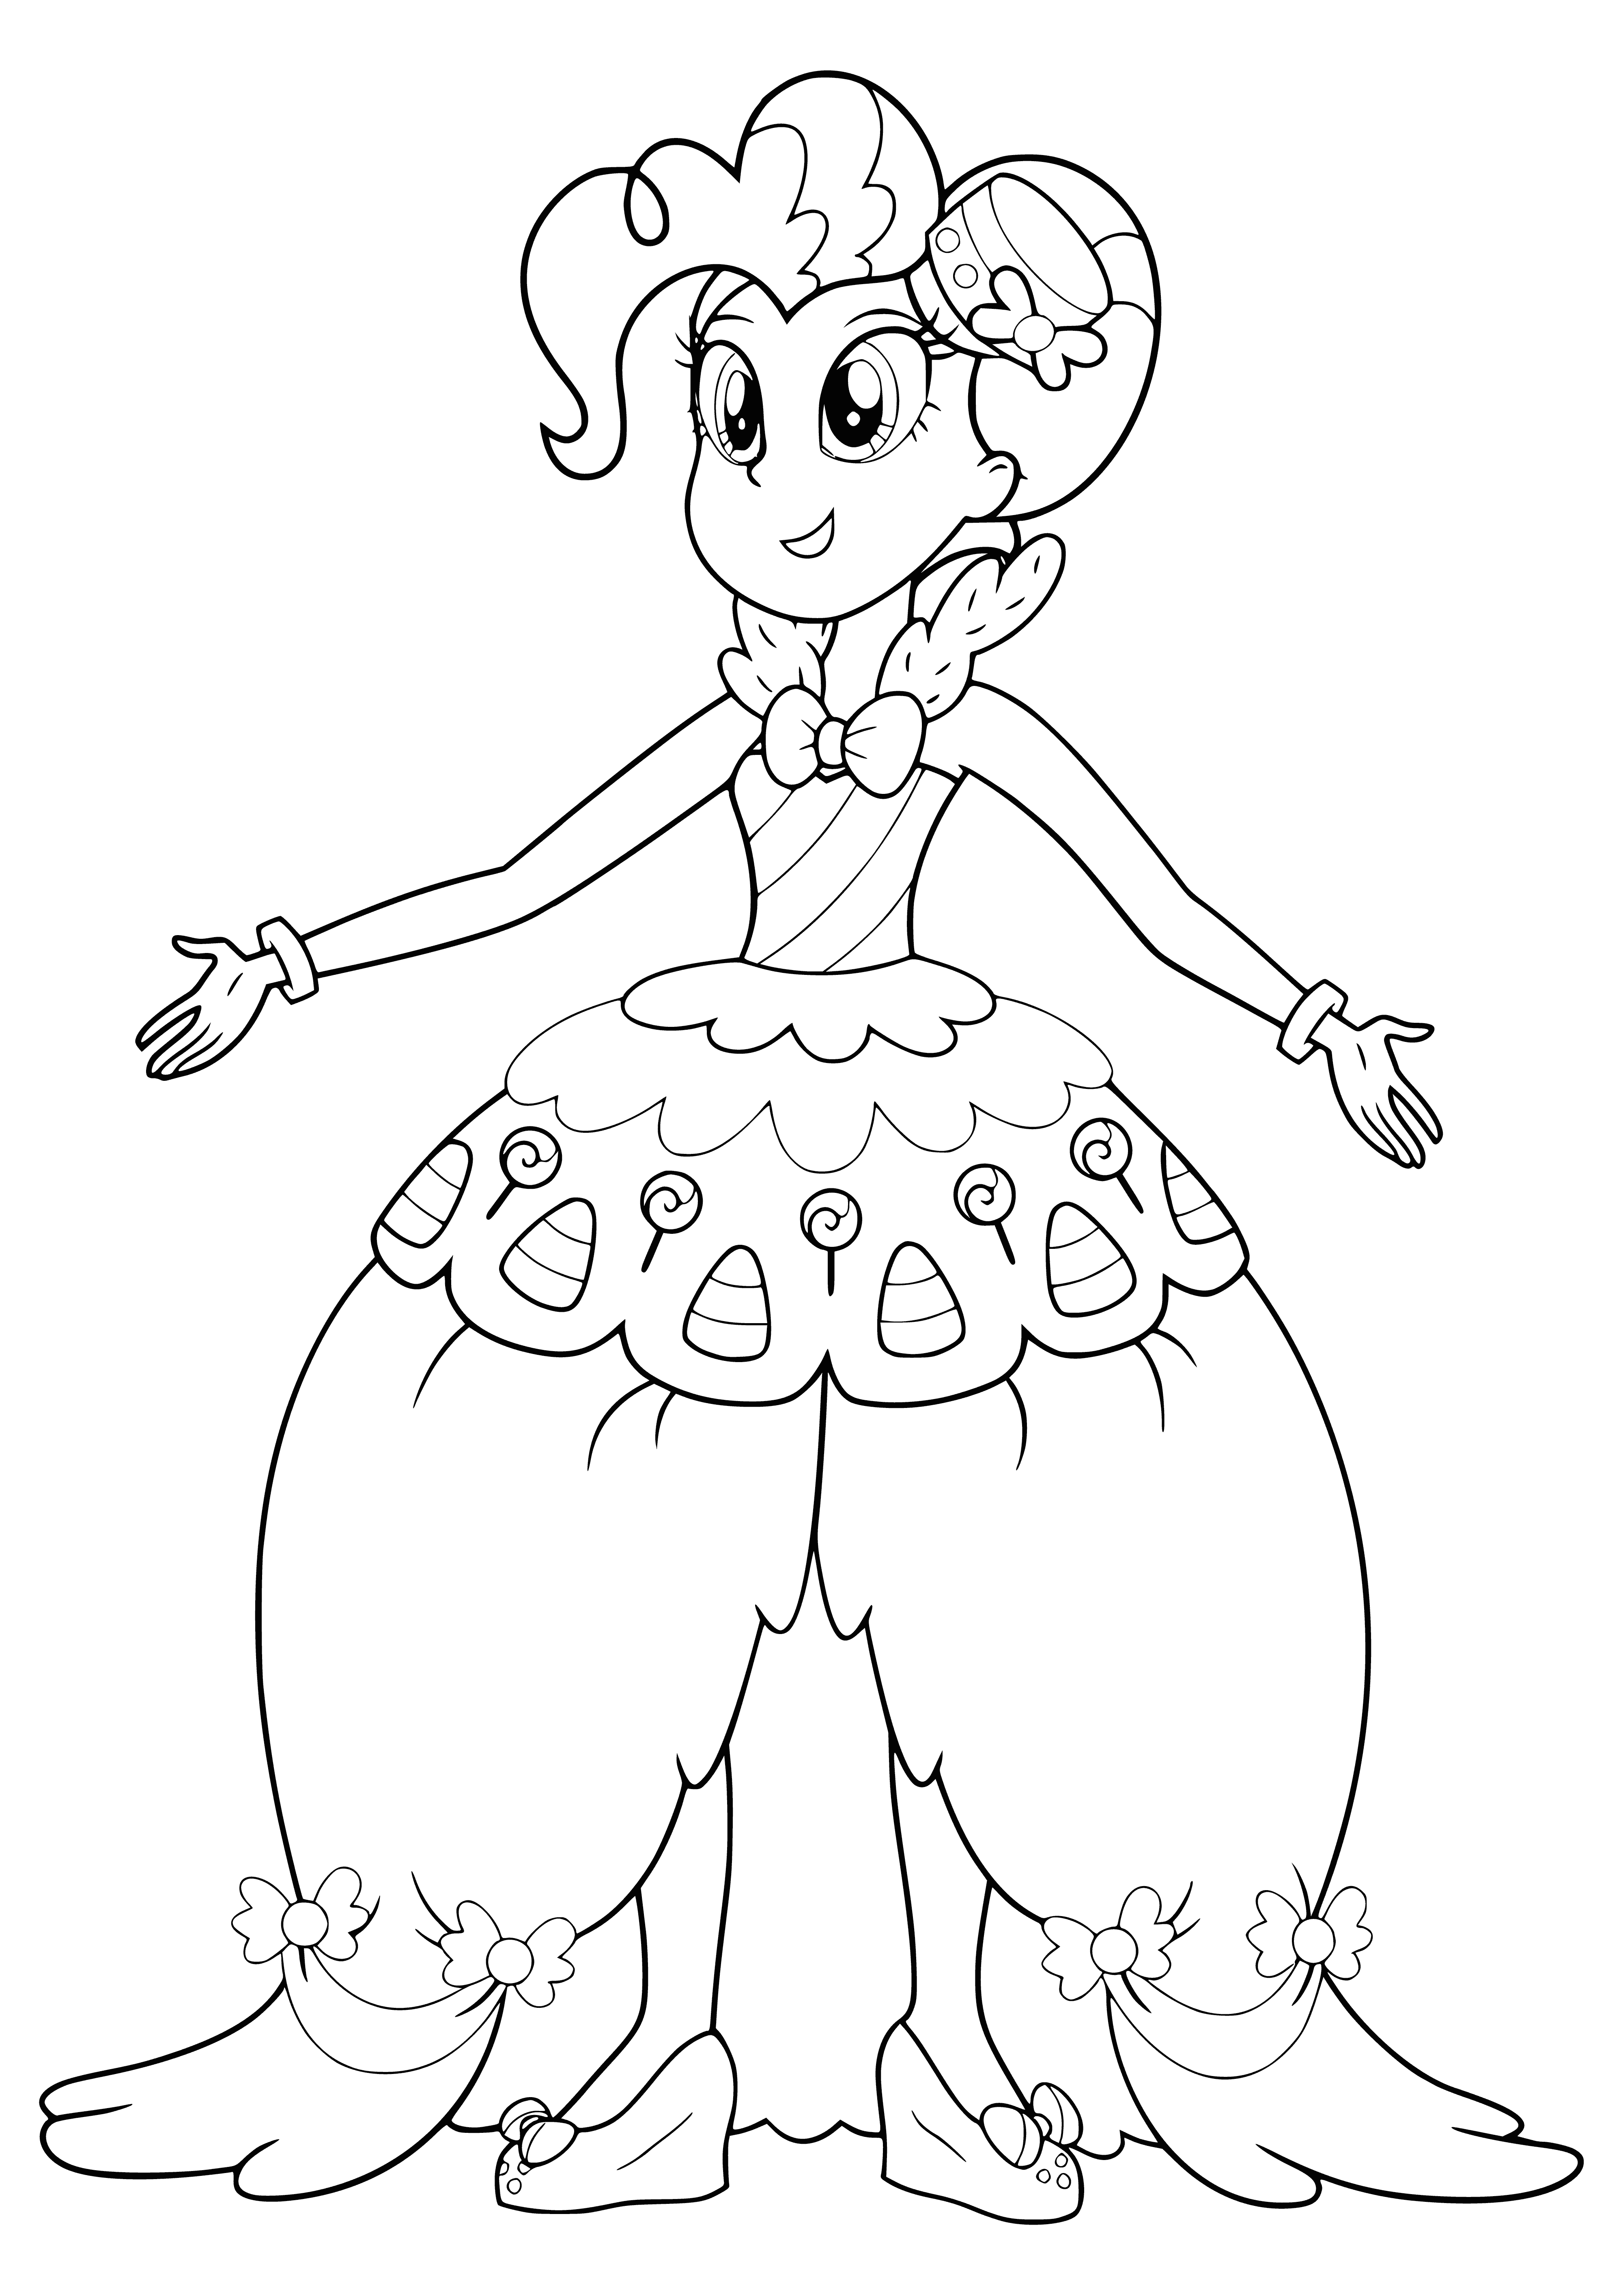 Pinkie Pie fille coloriage